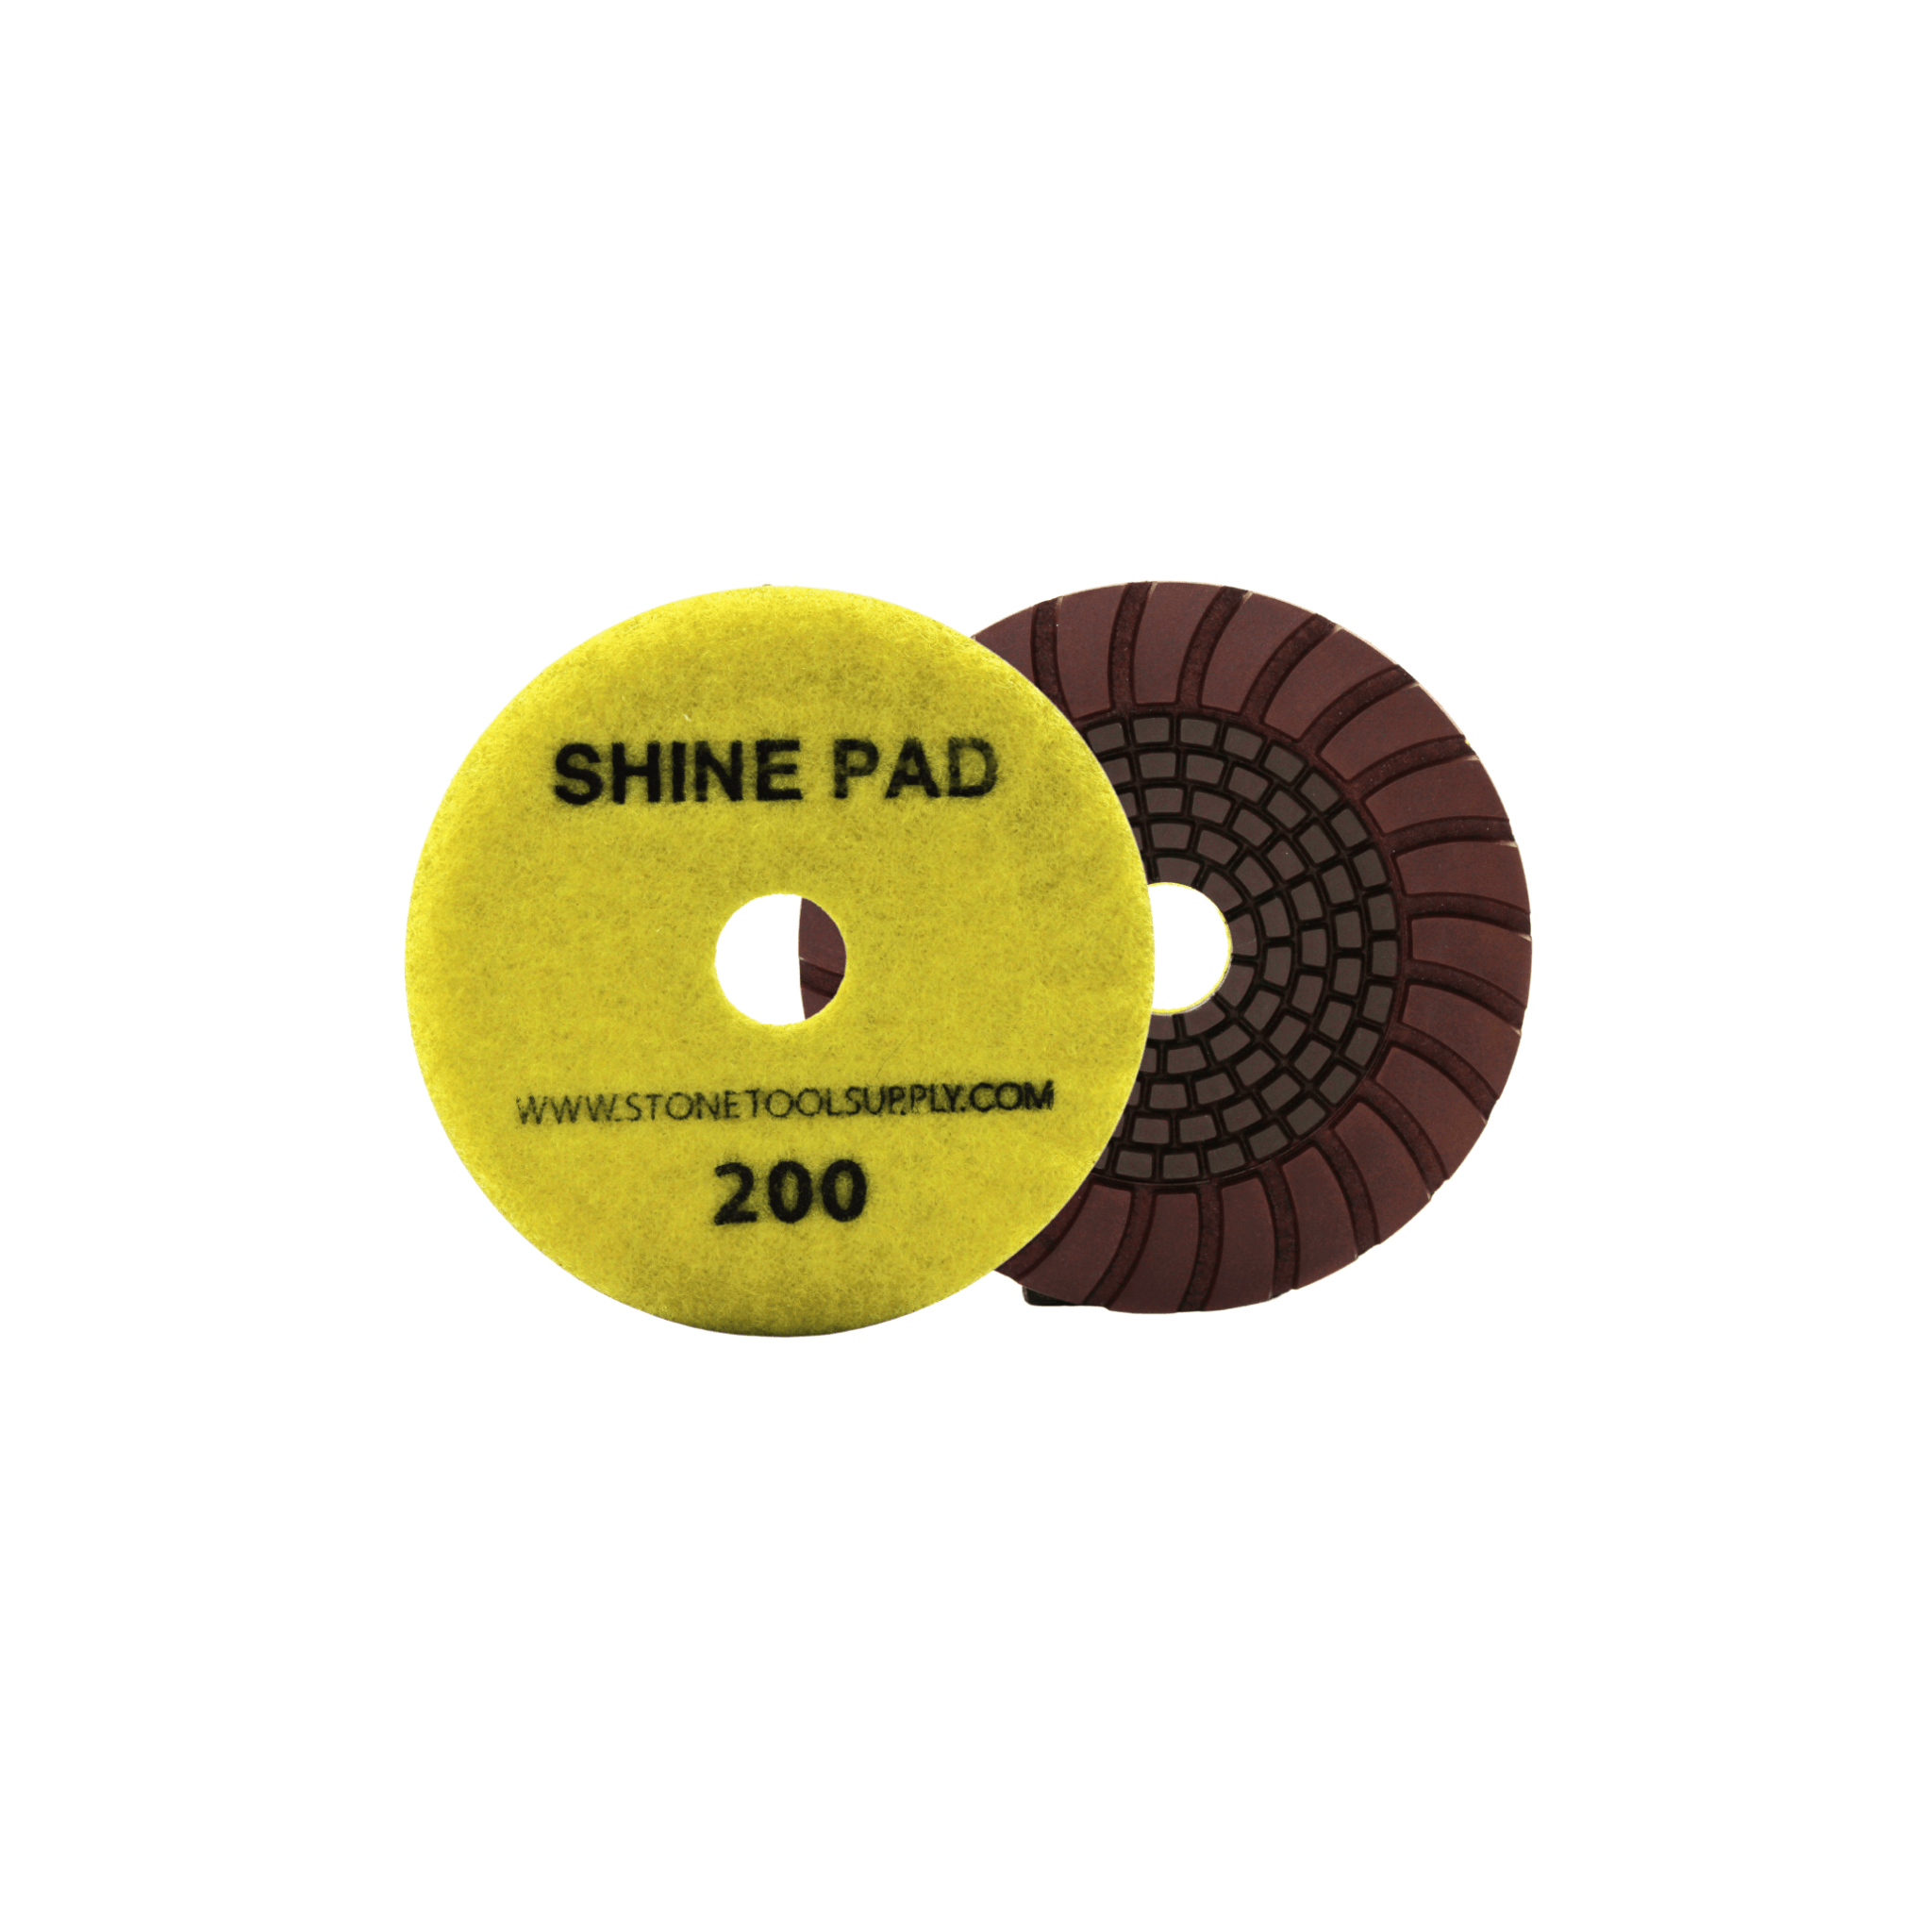 Copper and Resin Bonded 'Shine' Pad 4" #200 - Direct Stone Tool Supply, Inc